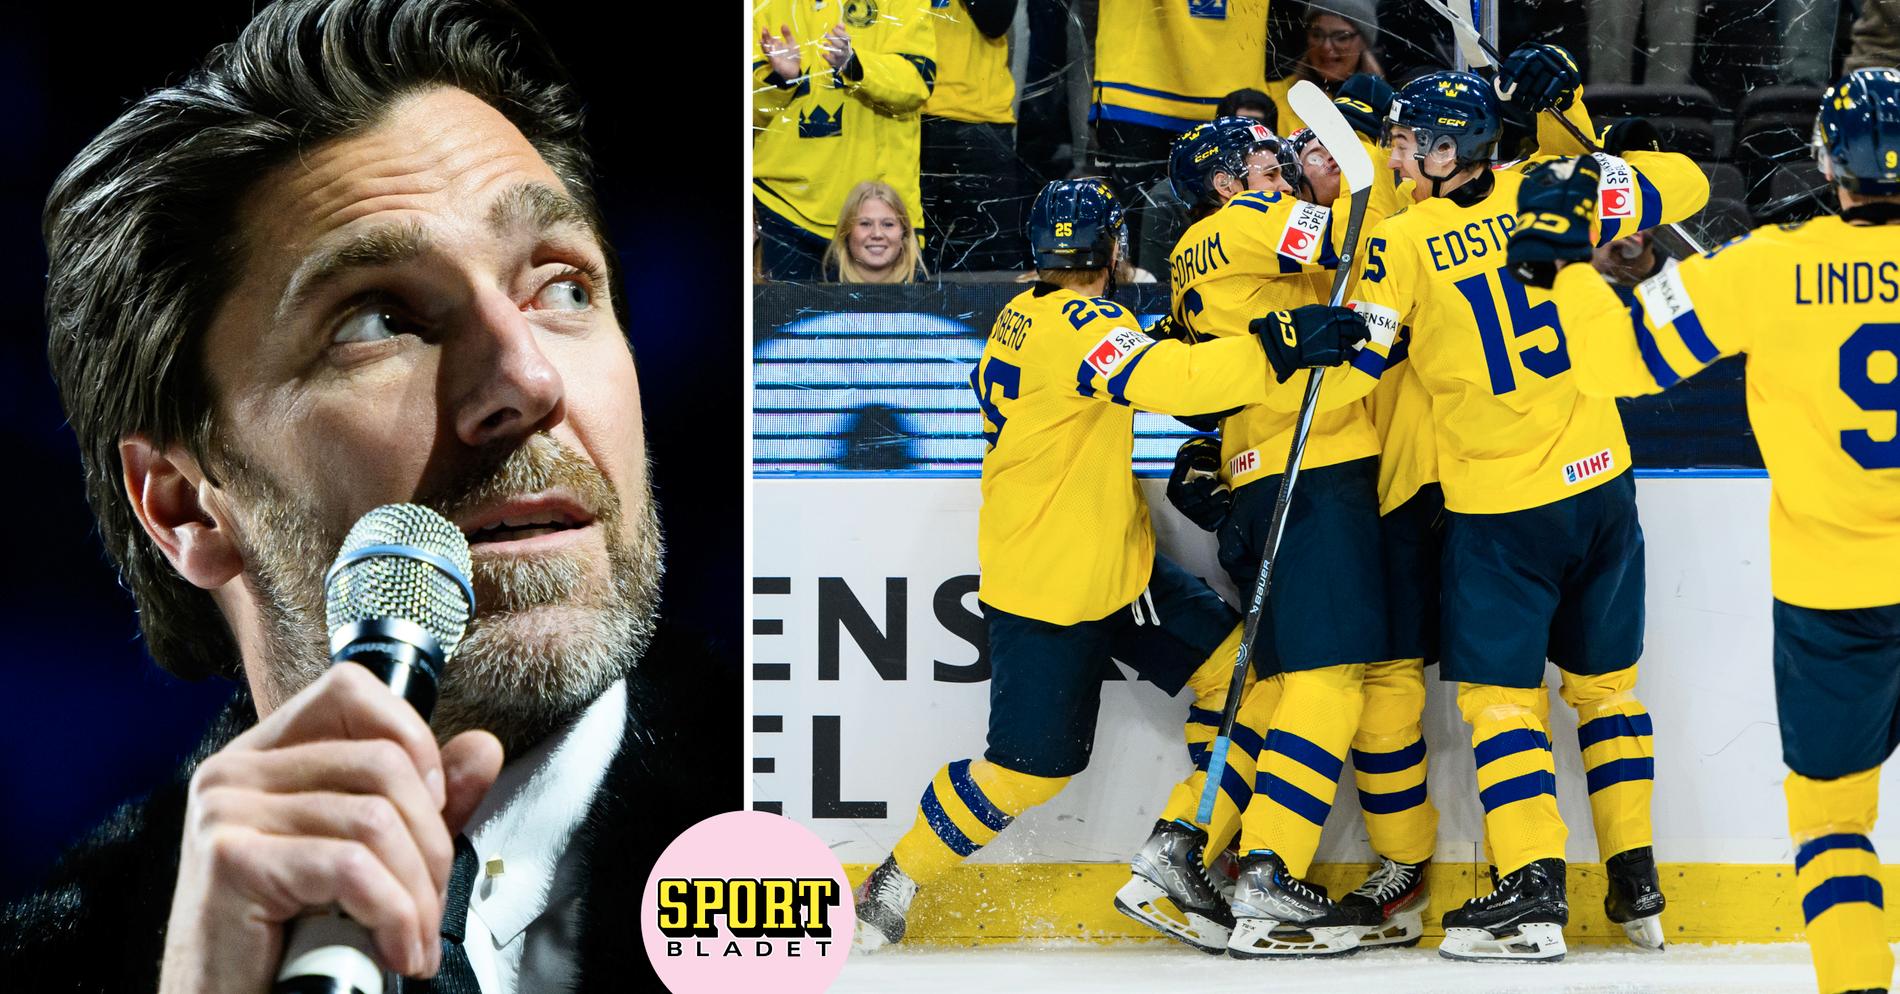 Henrik Lundqvist: “Early Elite Investment for 12-13 Year Olds in Swedish Hockey”